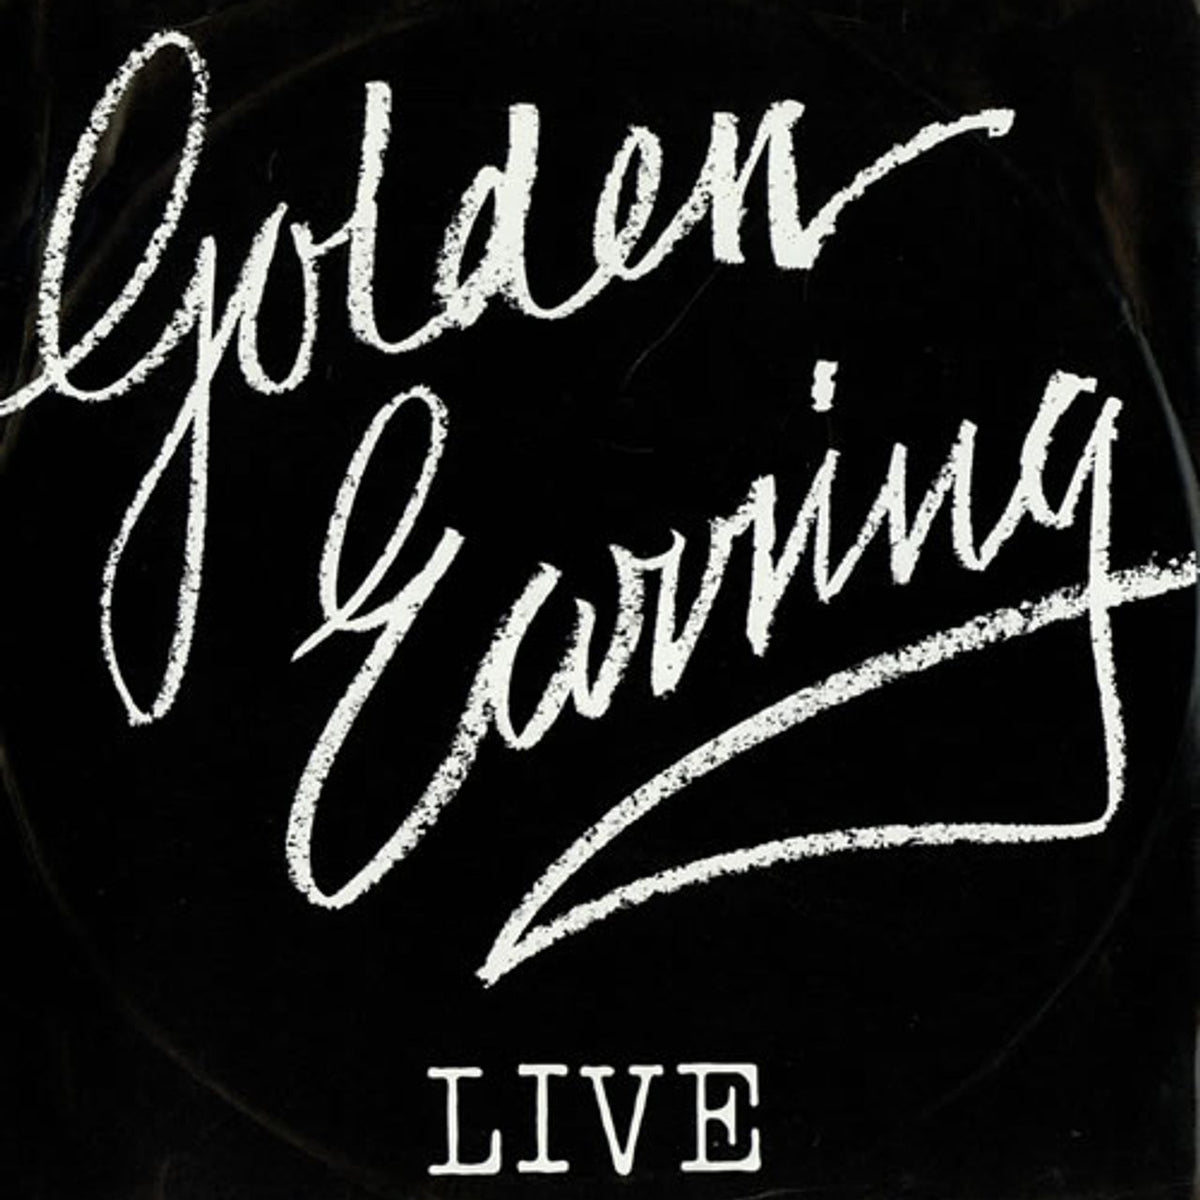 Golden Earring - Stand By Me - YouTube